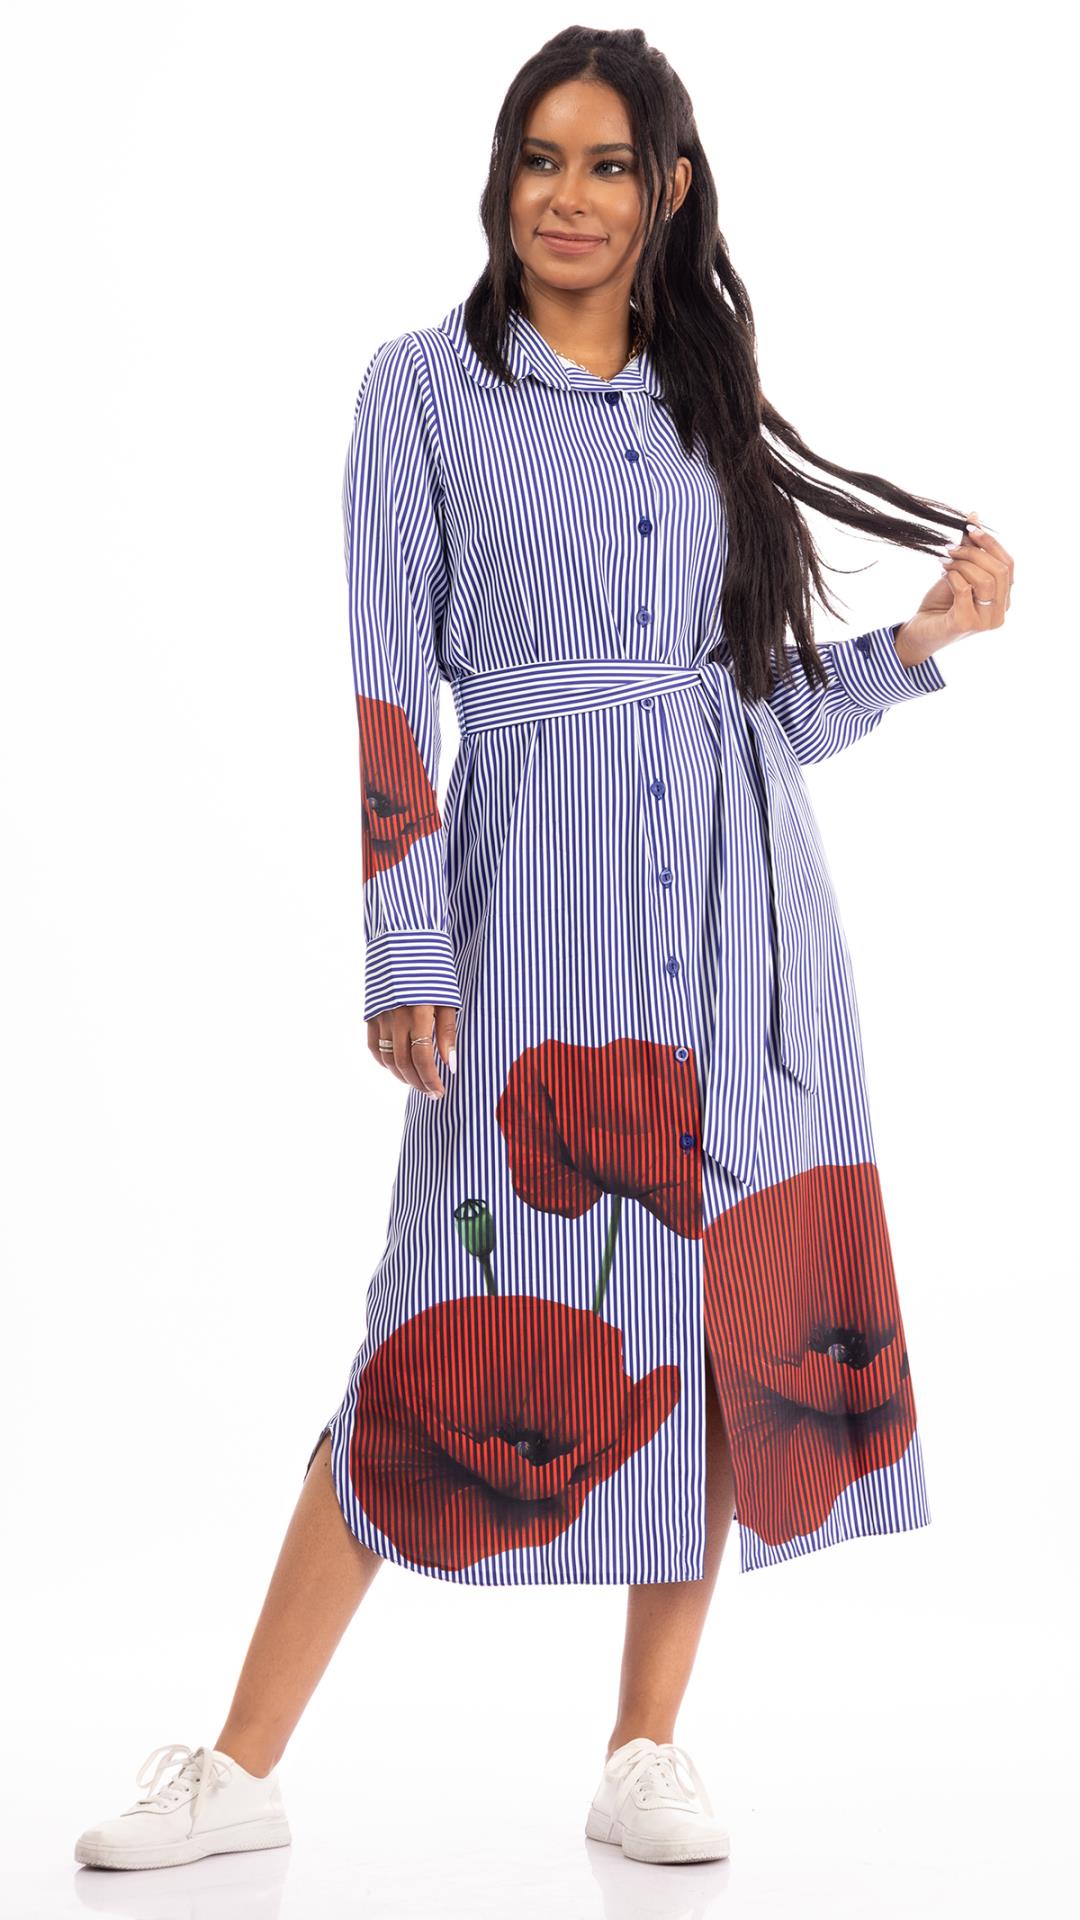 Striped dress with flowers at the bottom